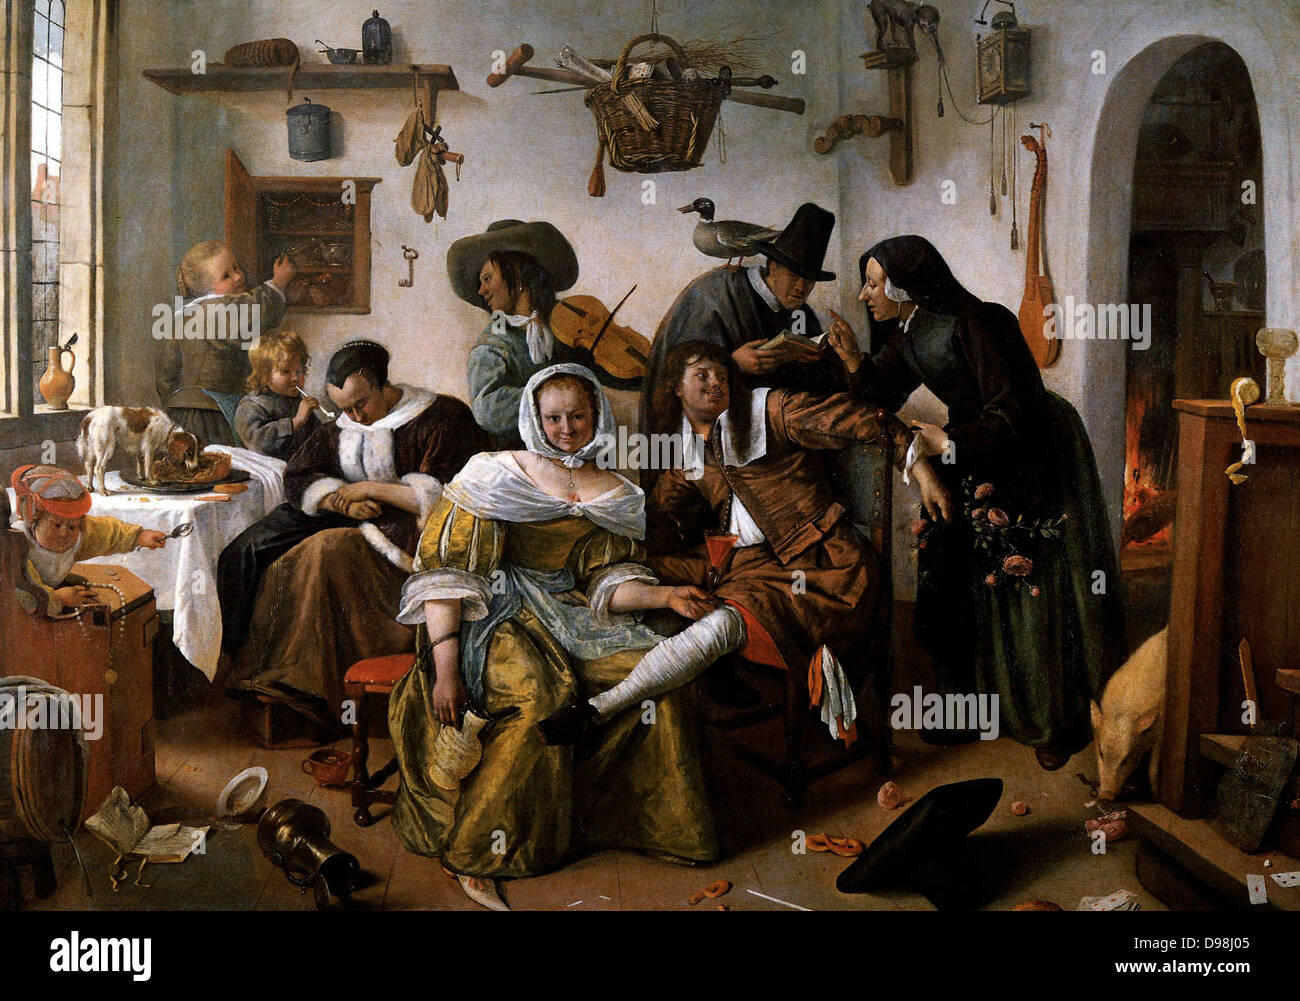 The World Upside Down, Jan Steen (1663)  Jan Havickszoon Steen (c. 1626 – buried February 3, 1679) was a Dutch genre painter of the 17th century (also known as the Dutch Golden Age). Psychological insight, sense of humour and abundance of colour are marks of his trade. Stock Photo